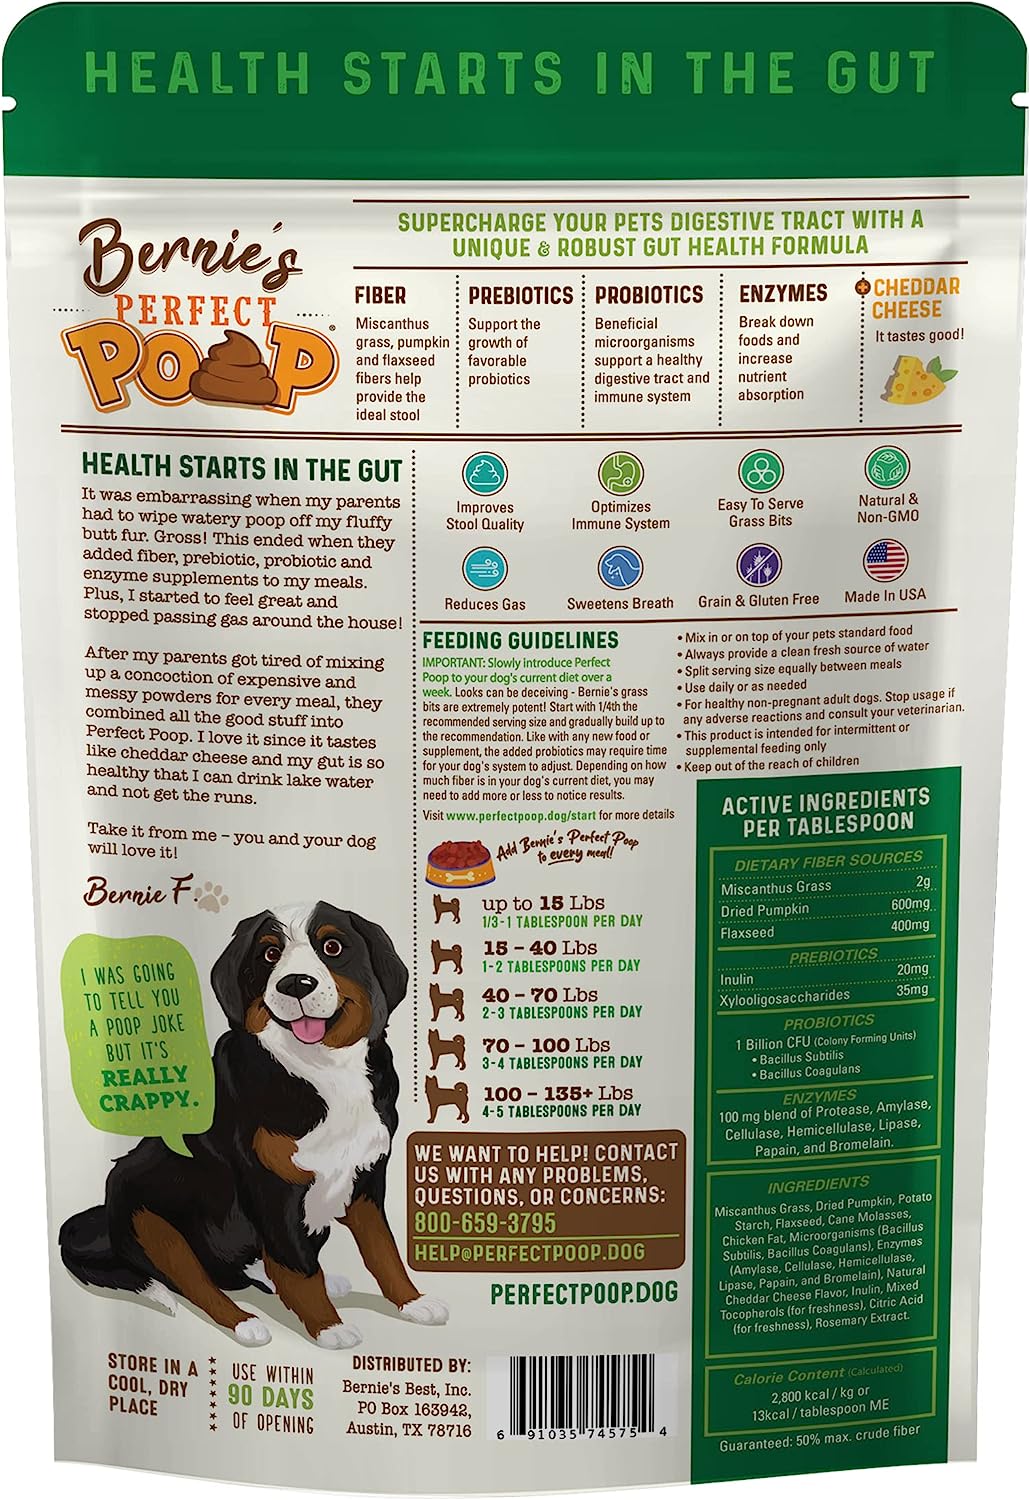 Bernie's Perfect Poop Digestion & General Health for Dogs Cheddar Cheese 363Gr.